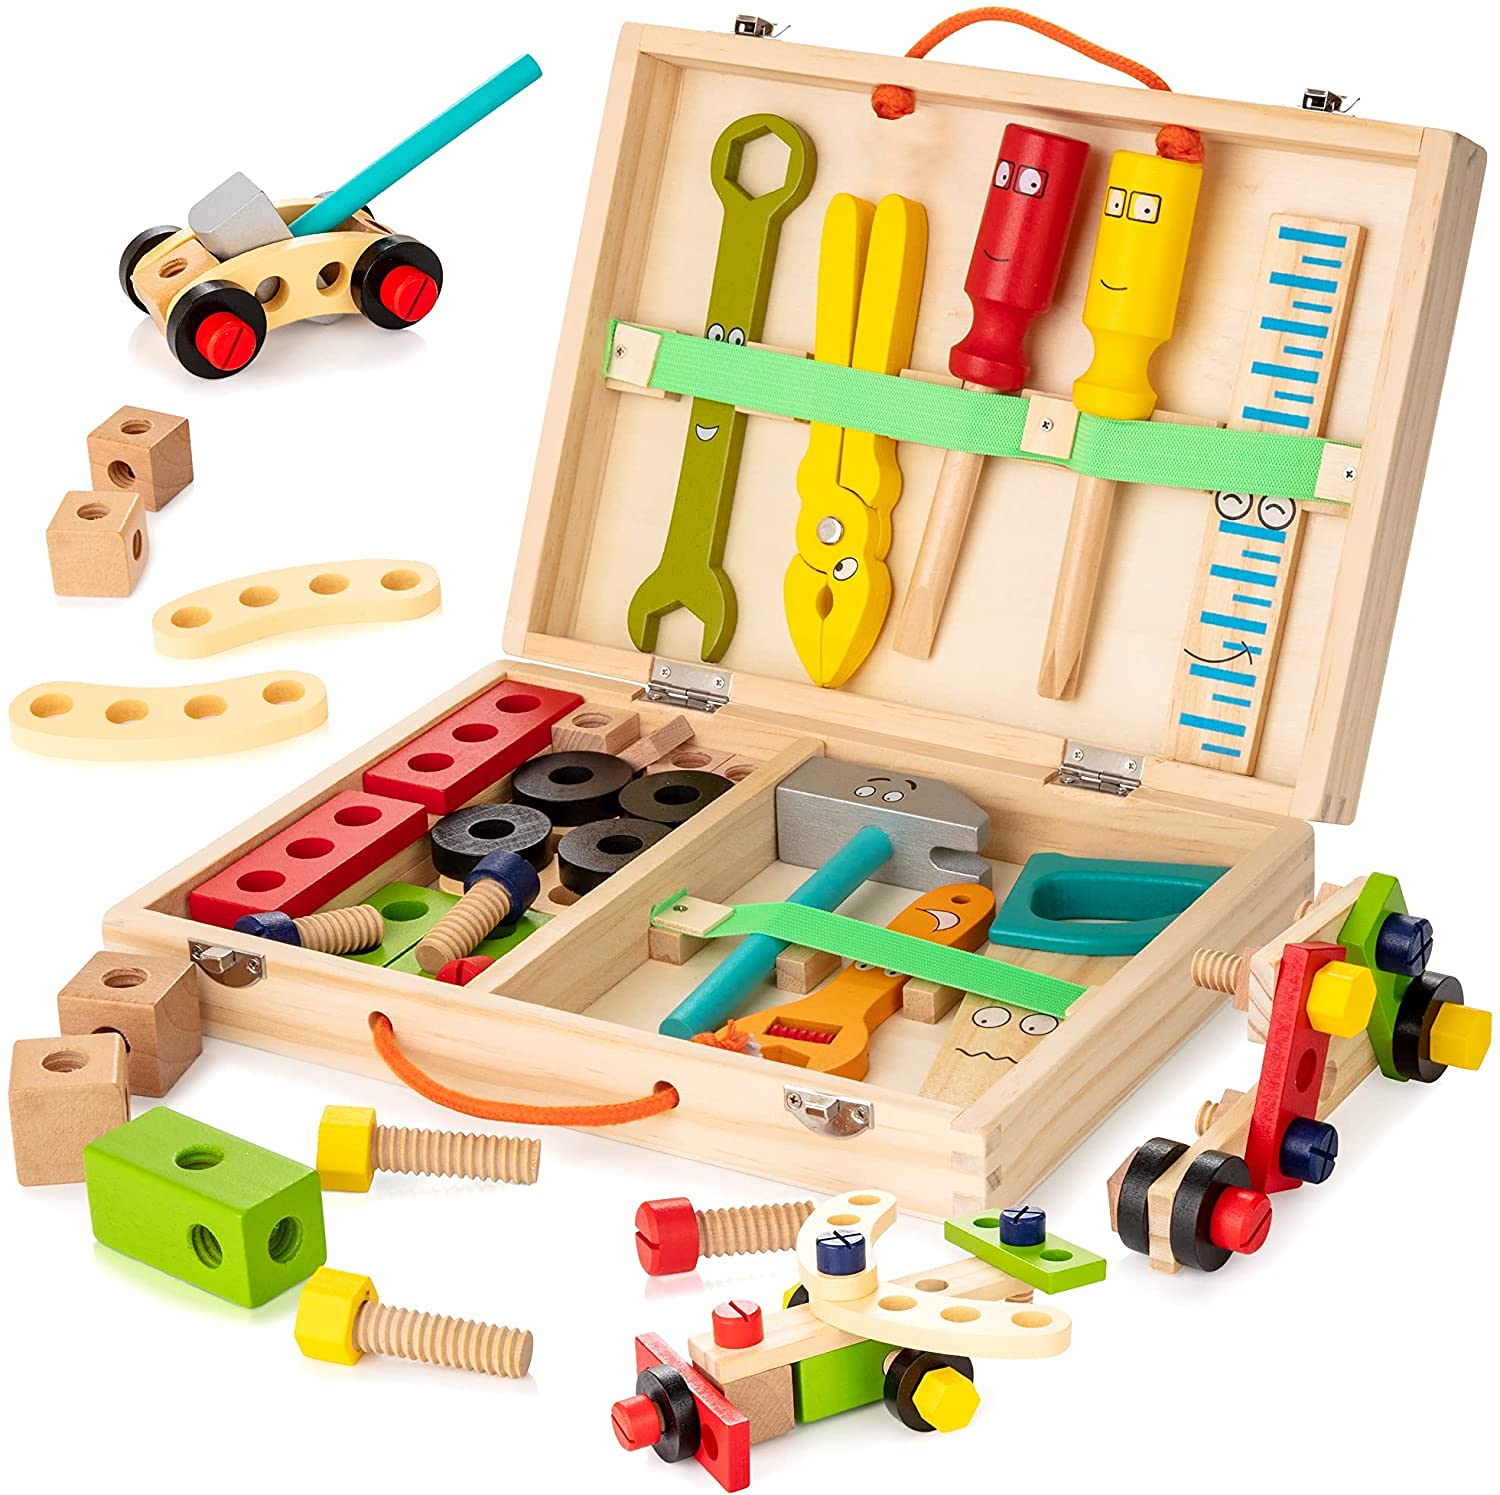 KIDWILL Tool Kit for Kids, Wooden Tool Box with 33pcs Wooden Tools, Building Toy Set, Educational STEM Construction Toy,Christmas Birthday Gift for 2 3 4 5 6 Year Old Toddlers Boys Girls